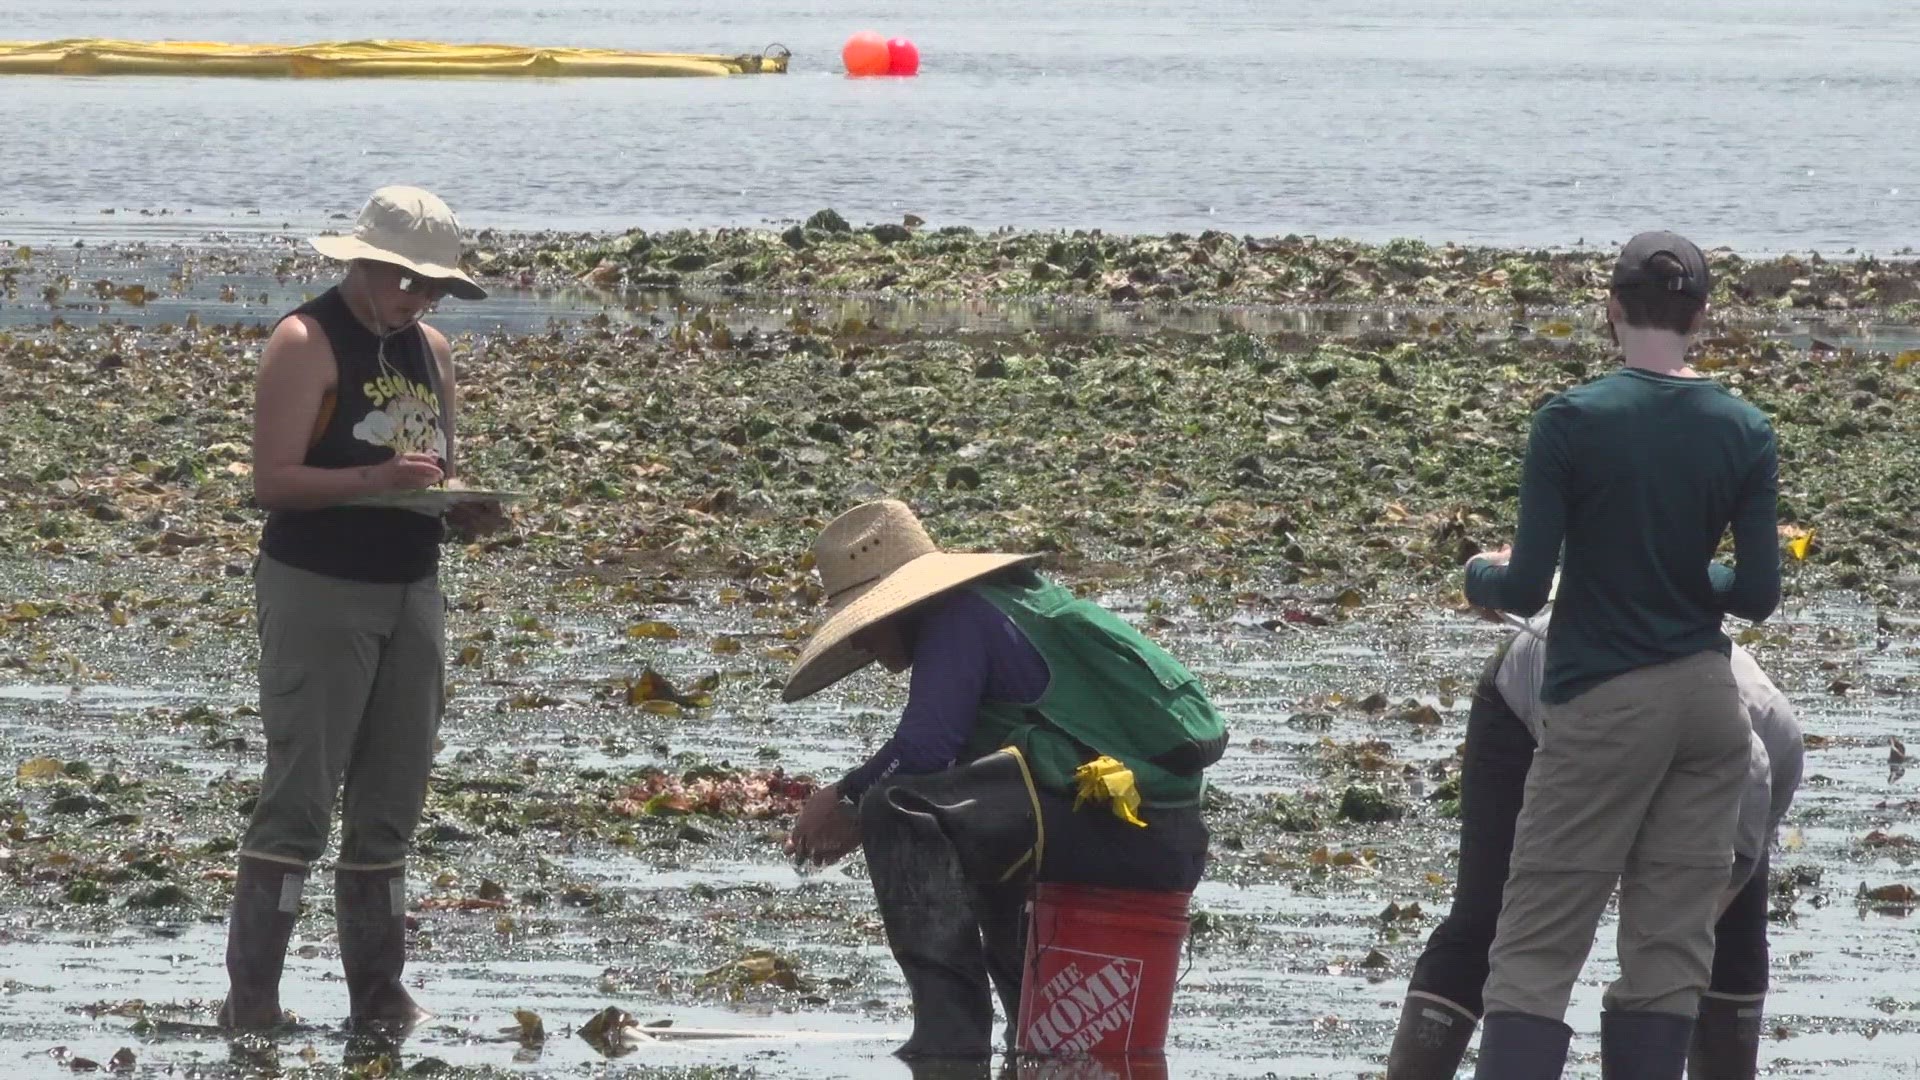 The Port and its partners are doing a pilot project to see how eelgrass, kelp and oyster restoration could impact water quality and other factors.